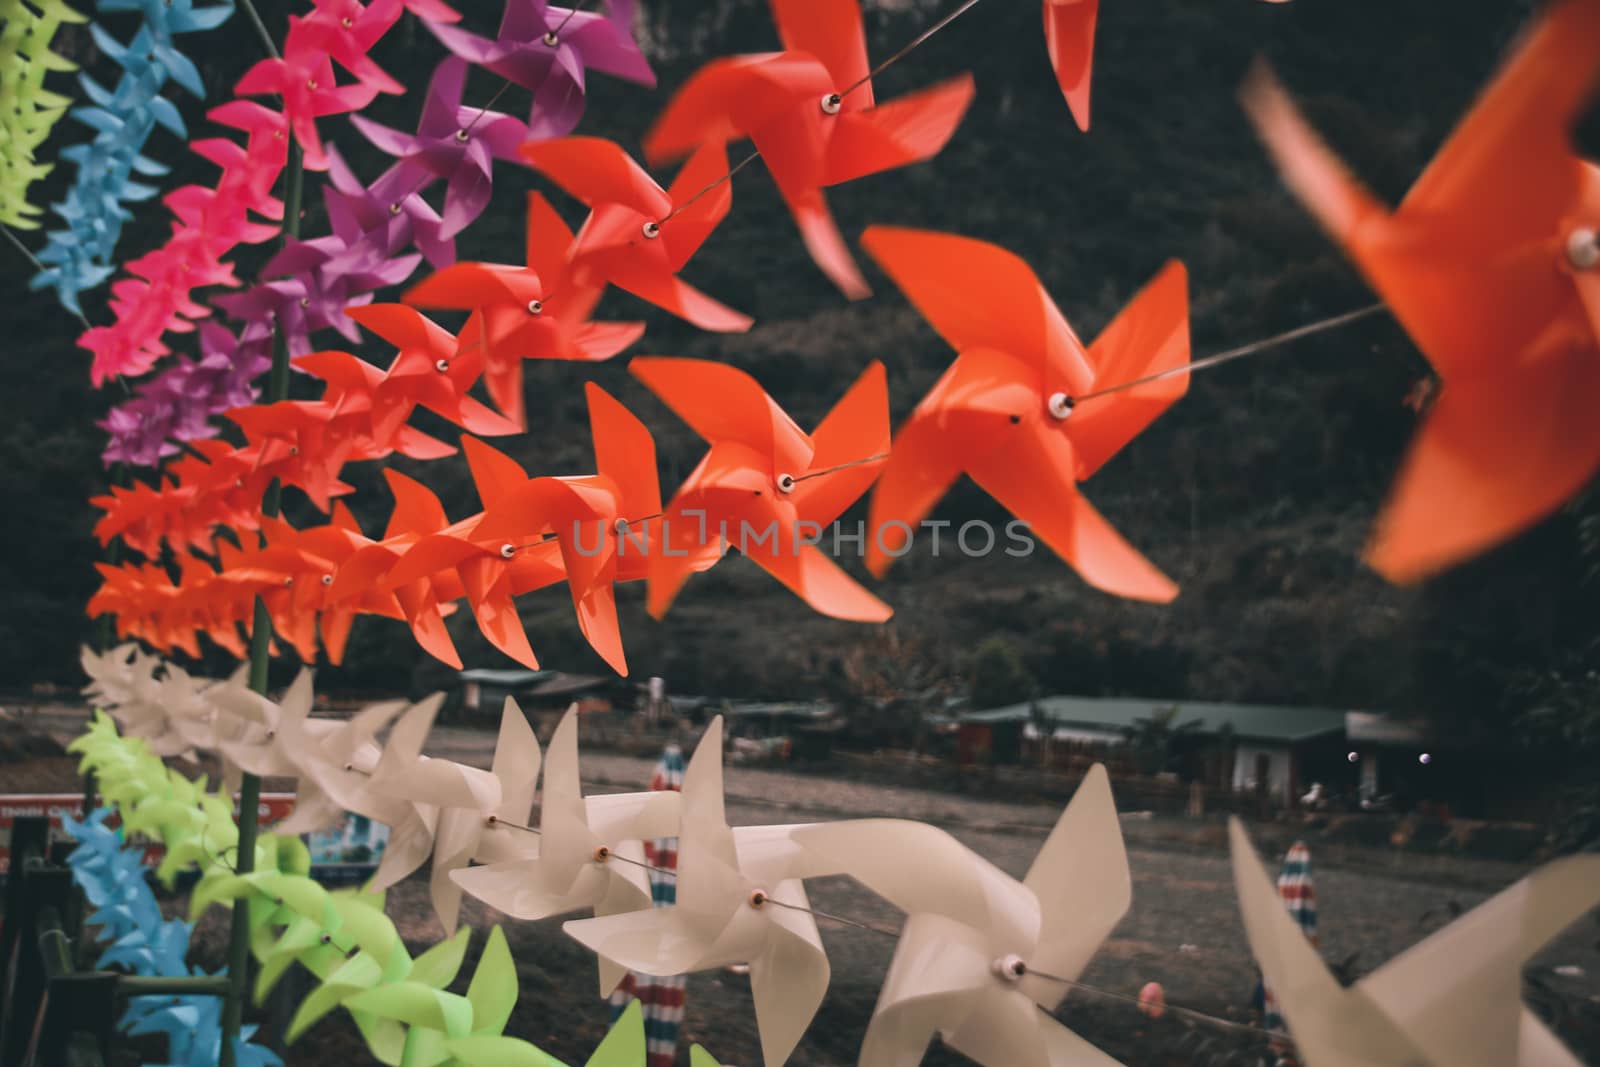 Colorful pinwheels strung together as a summer themed decoration to celebrate summer despite the covid-19 pandemic